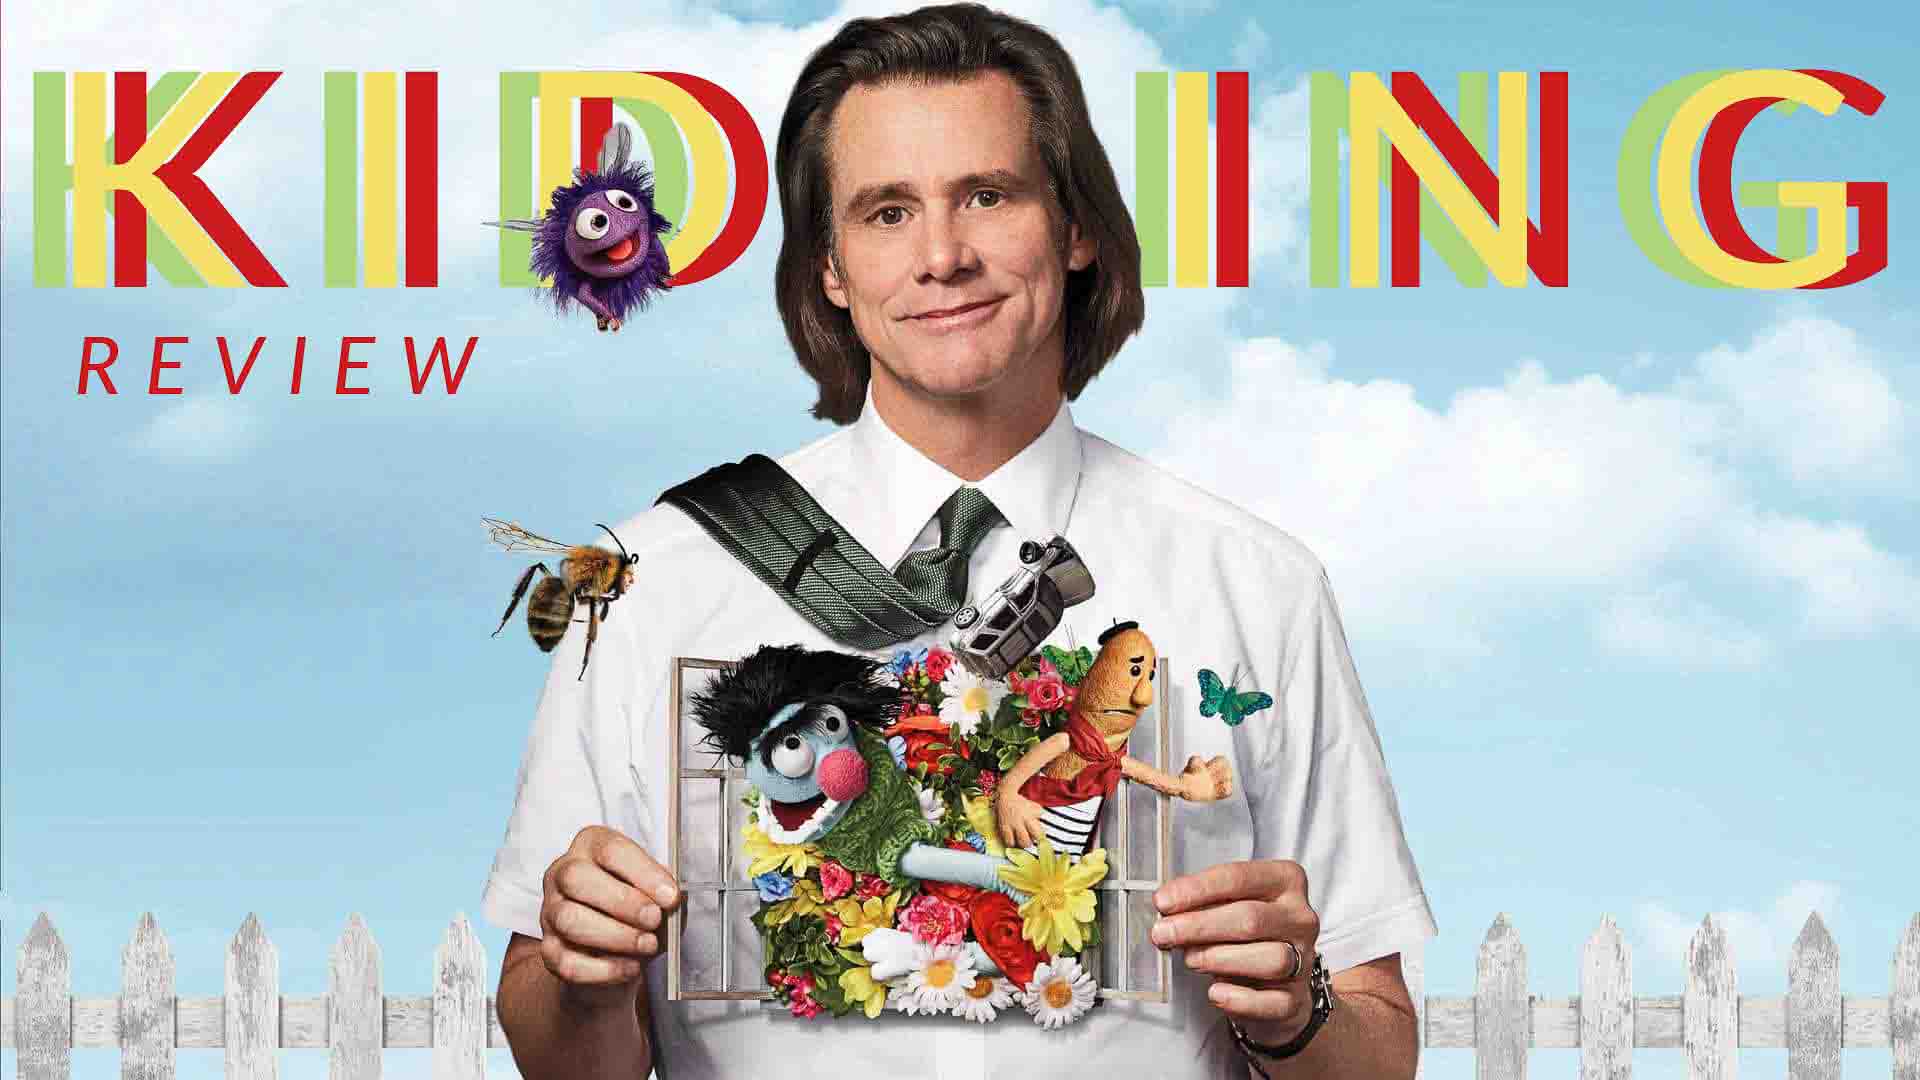 Kidding is an American comedy-drama television series created by Dave Holstein that premiered on September 9, 2018, on Showtime. The series stars Jim ...